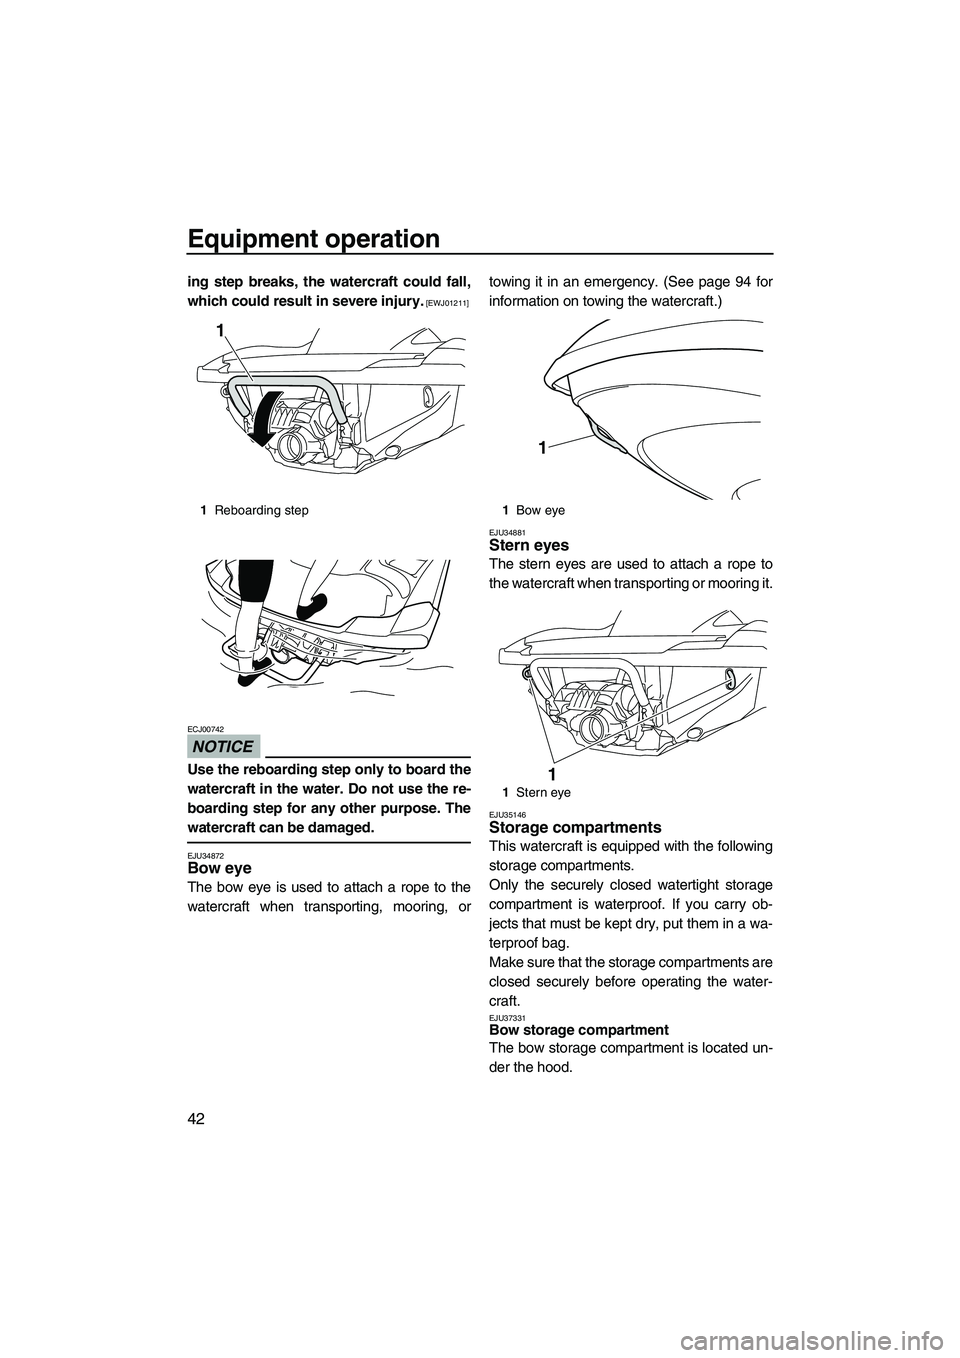 YAMAHA FZR 2012  Owners Manual Equipment operation
42
ing step breaks, the watercraft could fall,
which could result in severe injury.
 [EWJ01211]
NOTICE
ECJ00742
Use the reboarding step only to board the
watercraft in the water. D